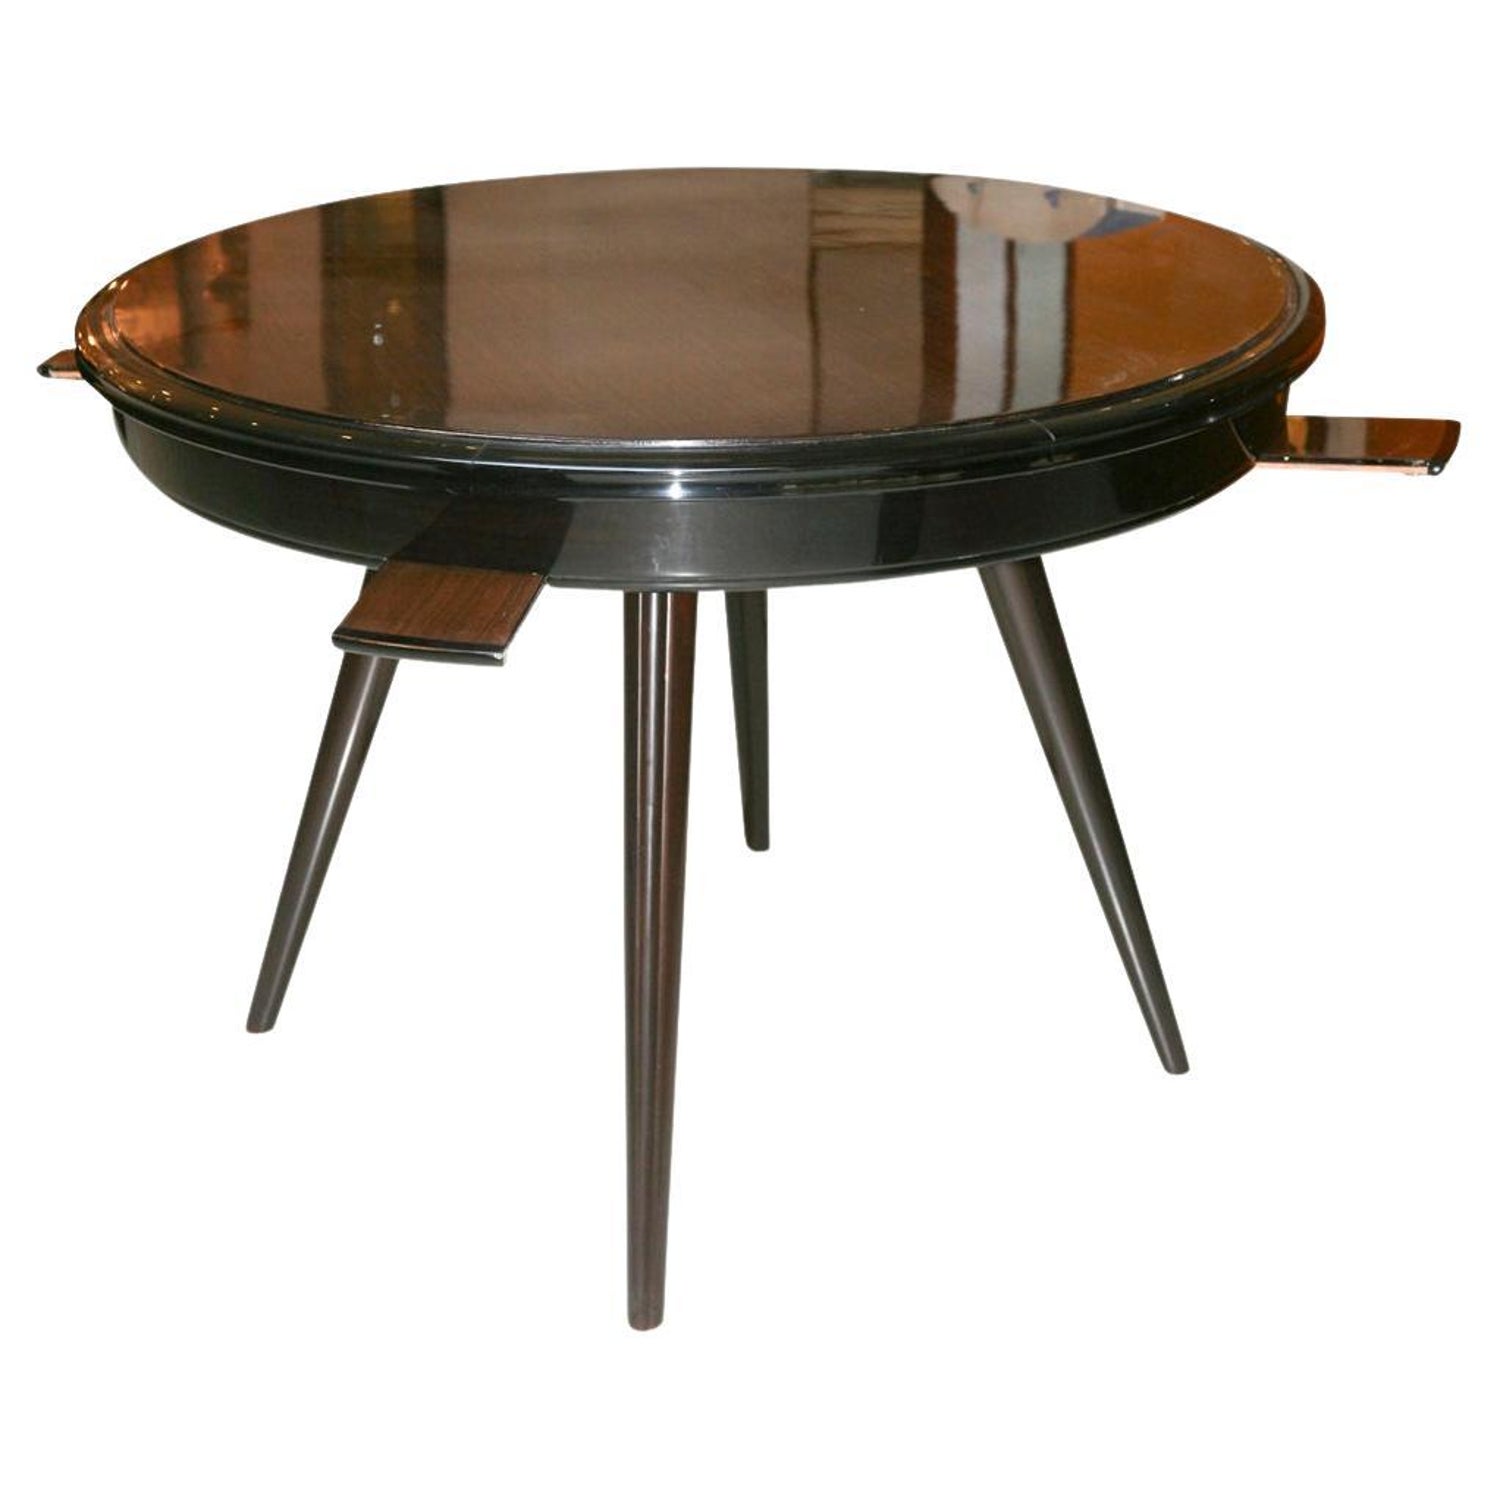 Italian Table ' 4 People', Year: 1950 For Sale at 1stDibs